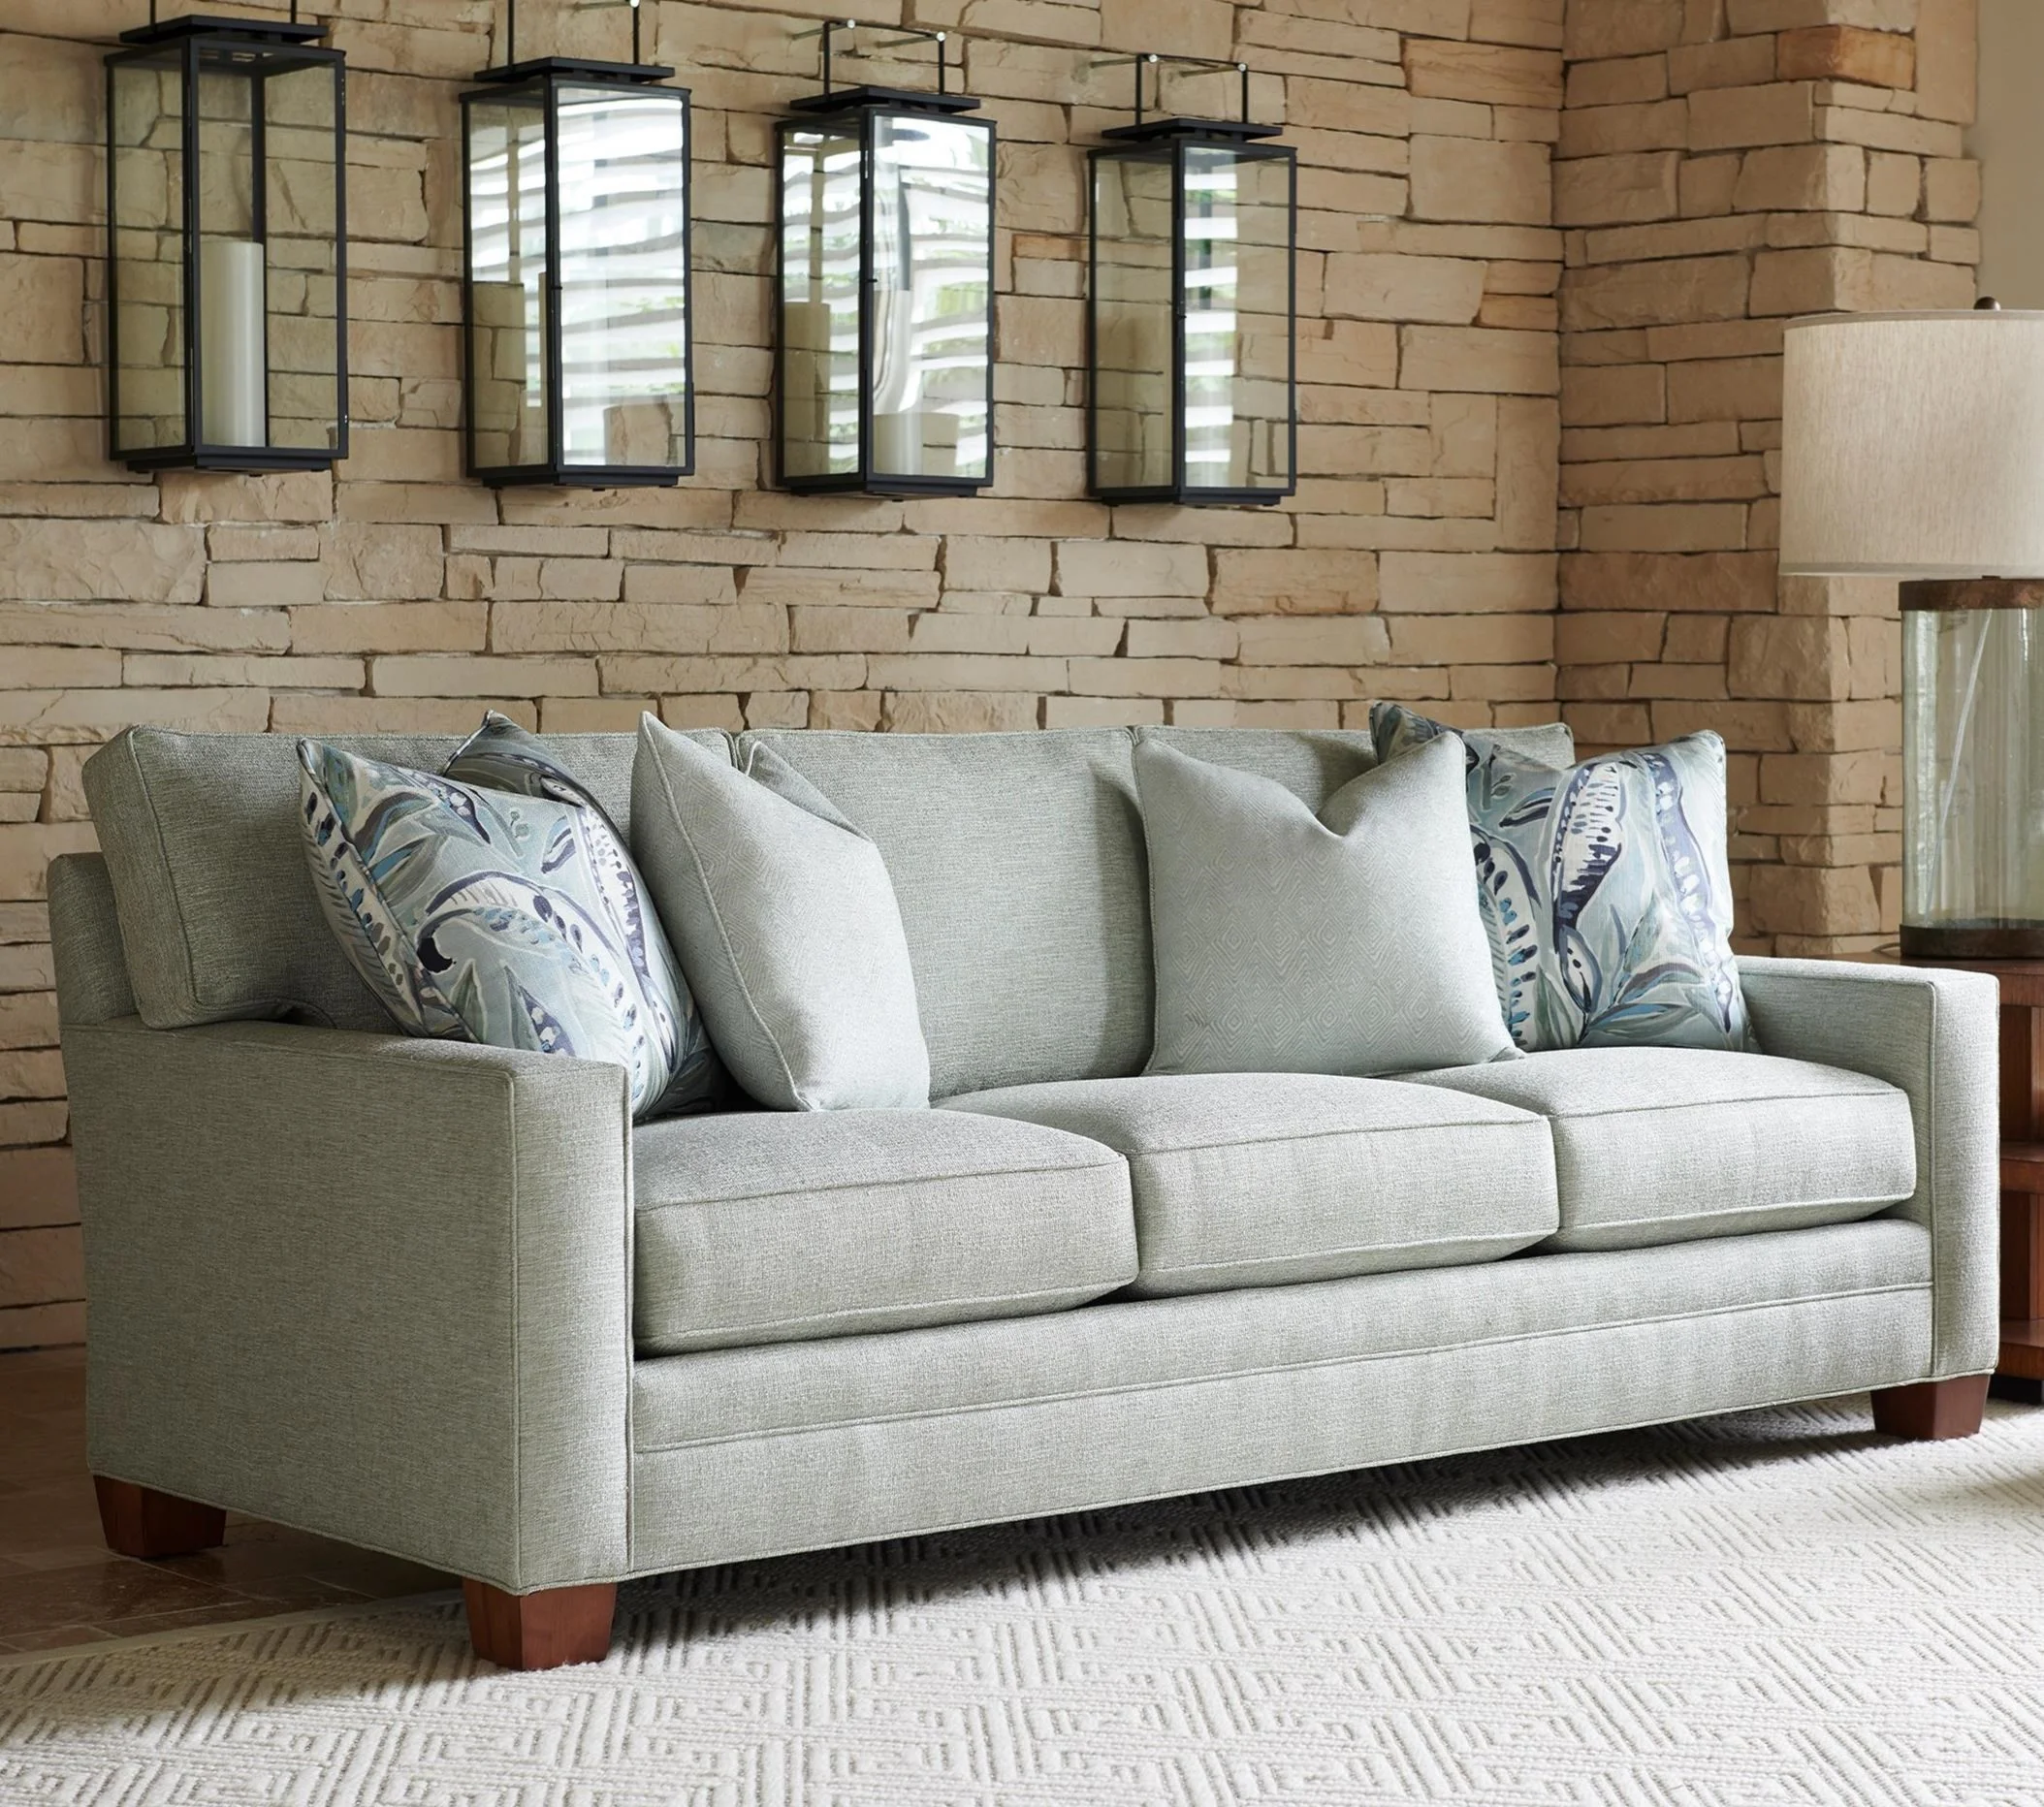 Sofa Toppers Are a Thing — and They're Exactly What Your Family Sofa Needs